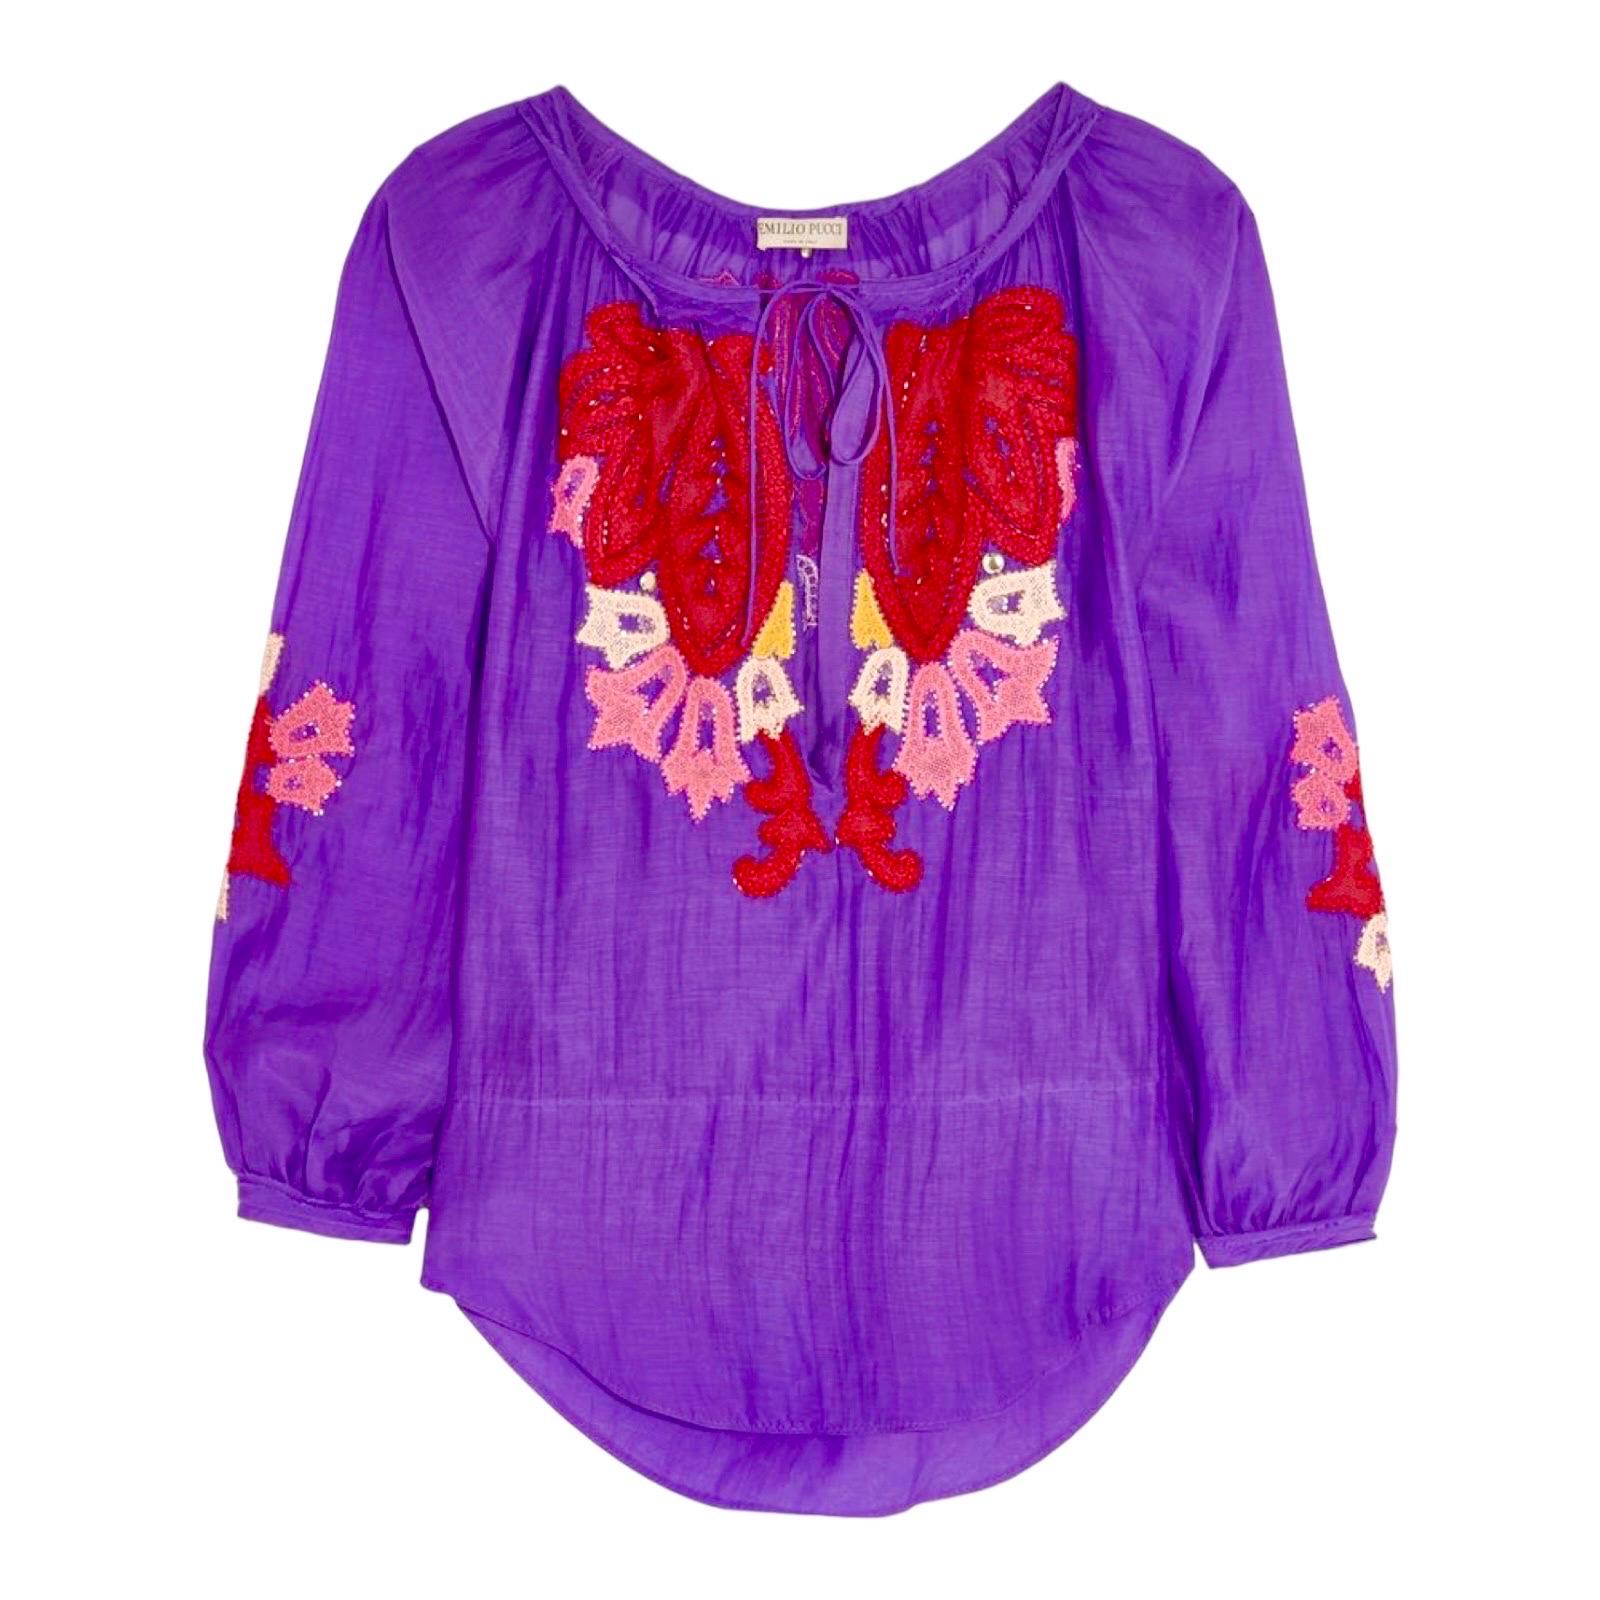 UNWORN Emilio Pucci by Peter Dundas Embroidered Kaftan Tunic Top Blouse 46 For Sale